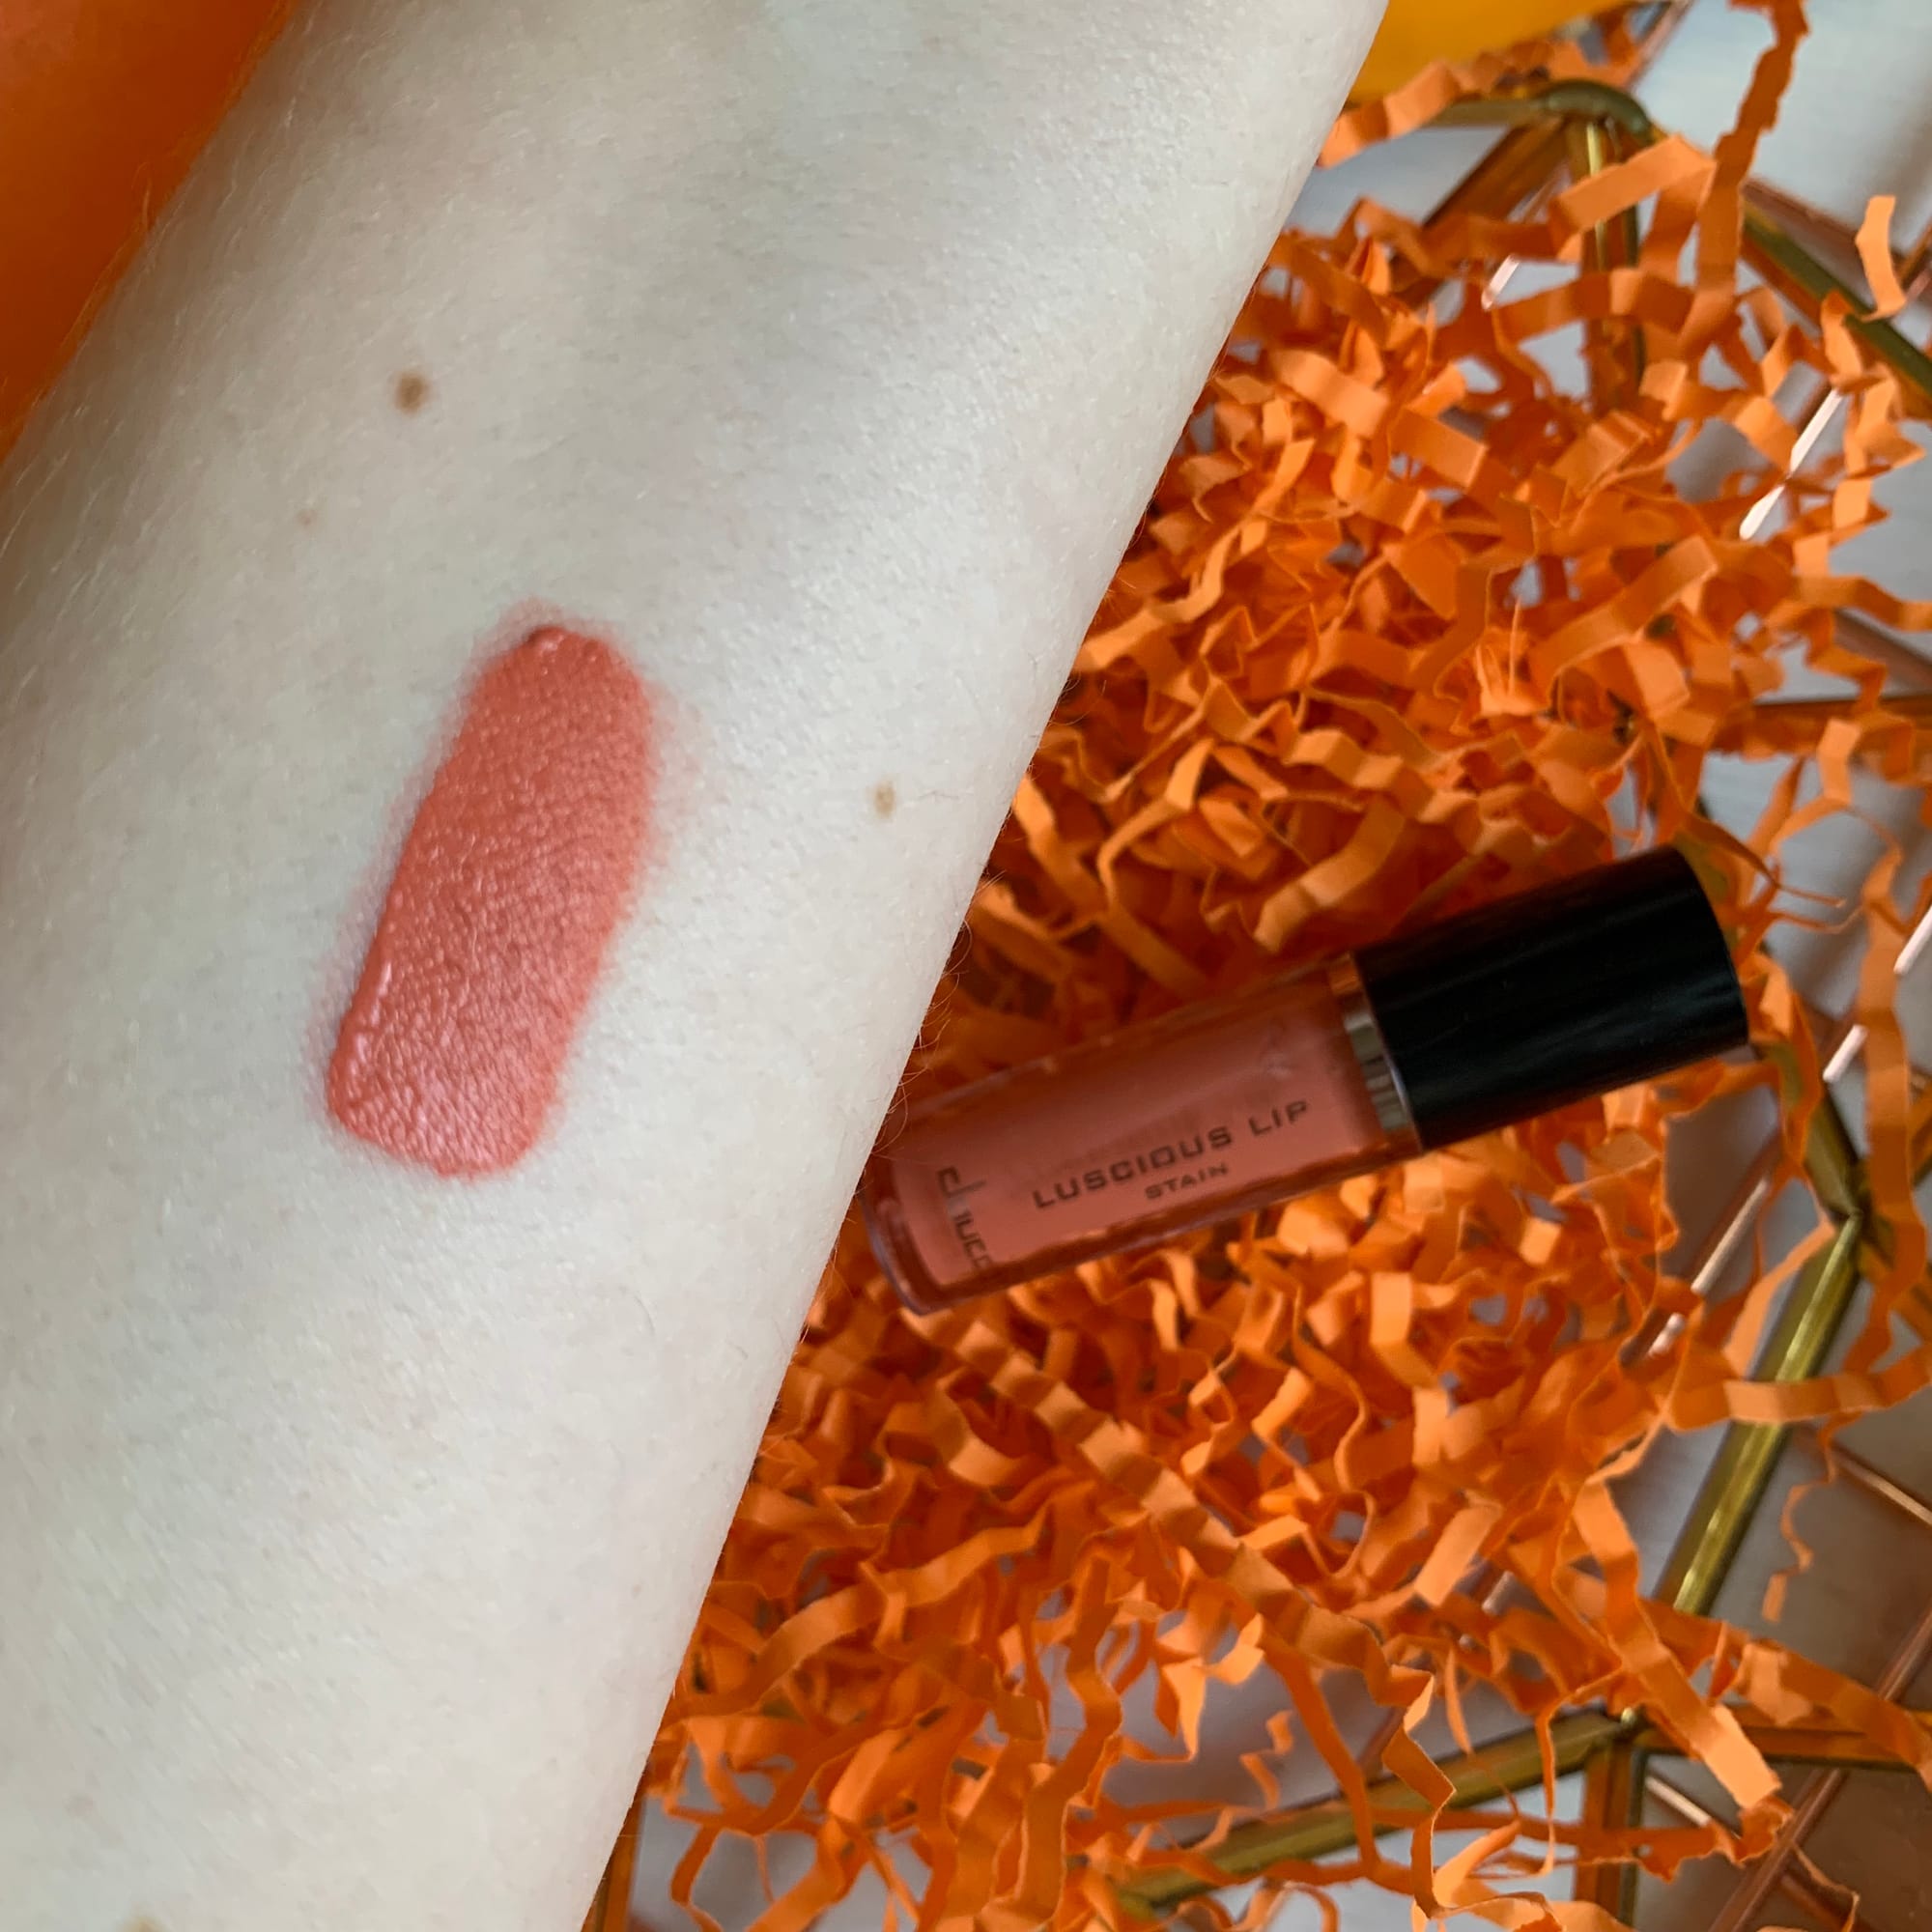 Doucce Lip Stain - Look Fantastic Beauty Box Review - August 2019 - Miss Boux